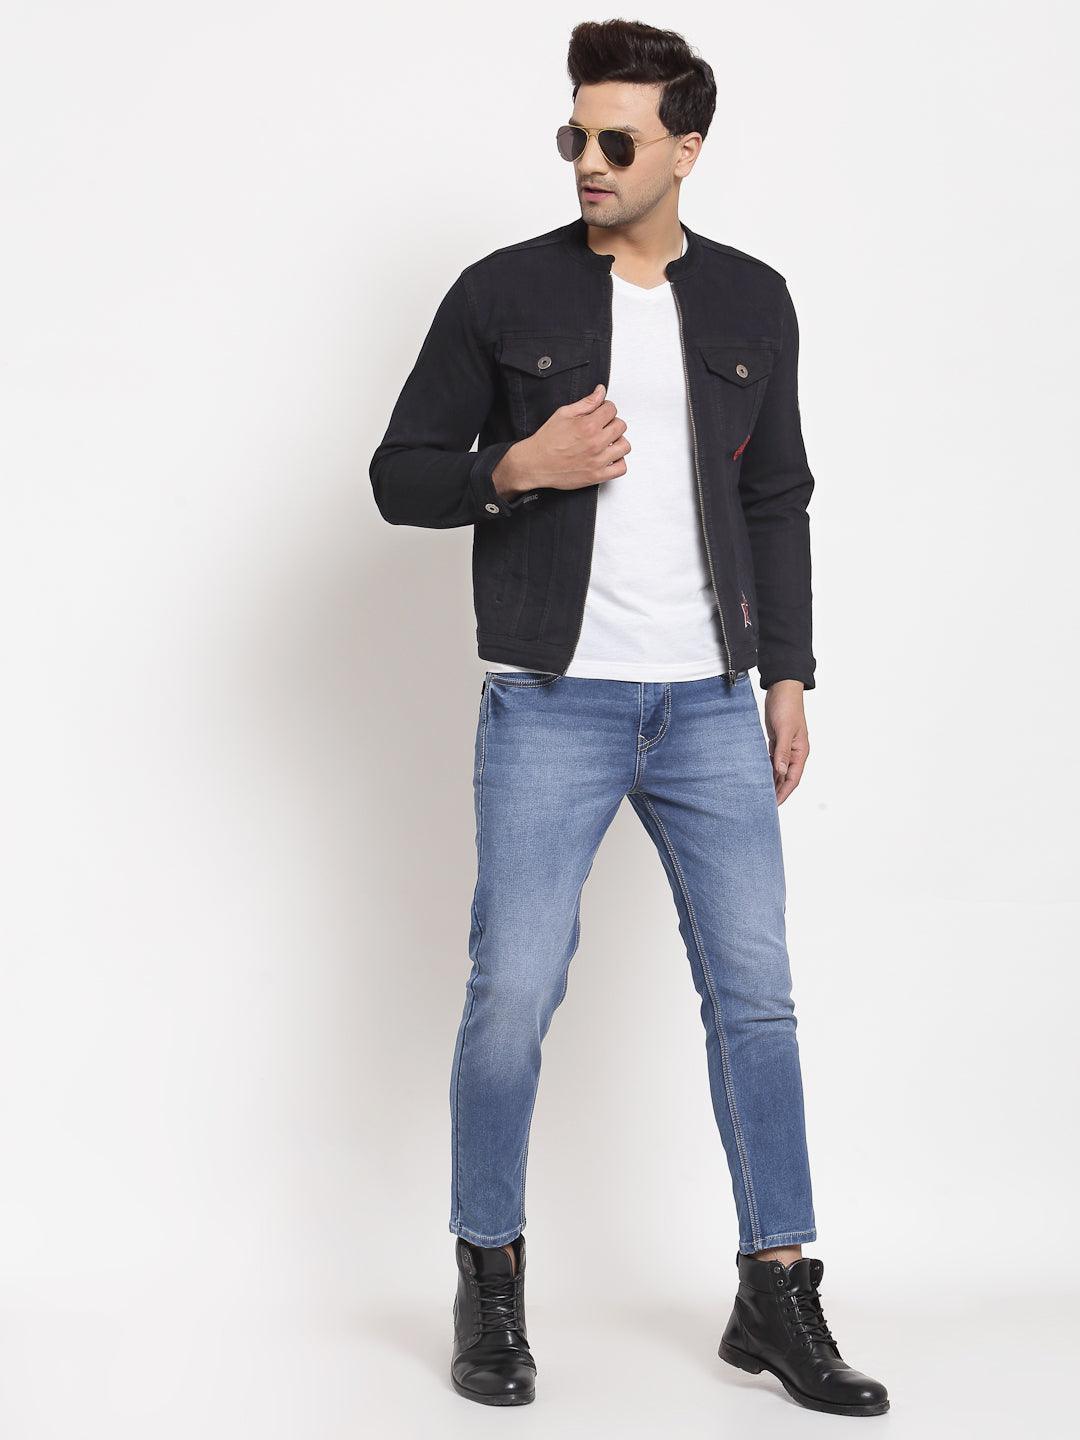 The Denim Jacket You Can Wear Out at Night | Black denim jacket men, Denim  jacket men, Mens outfits